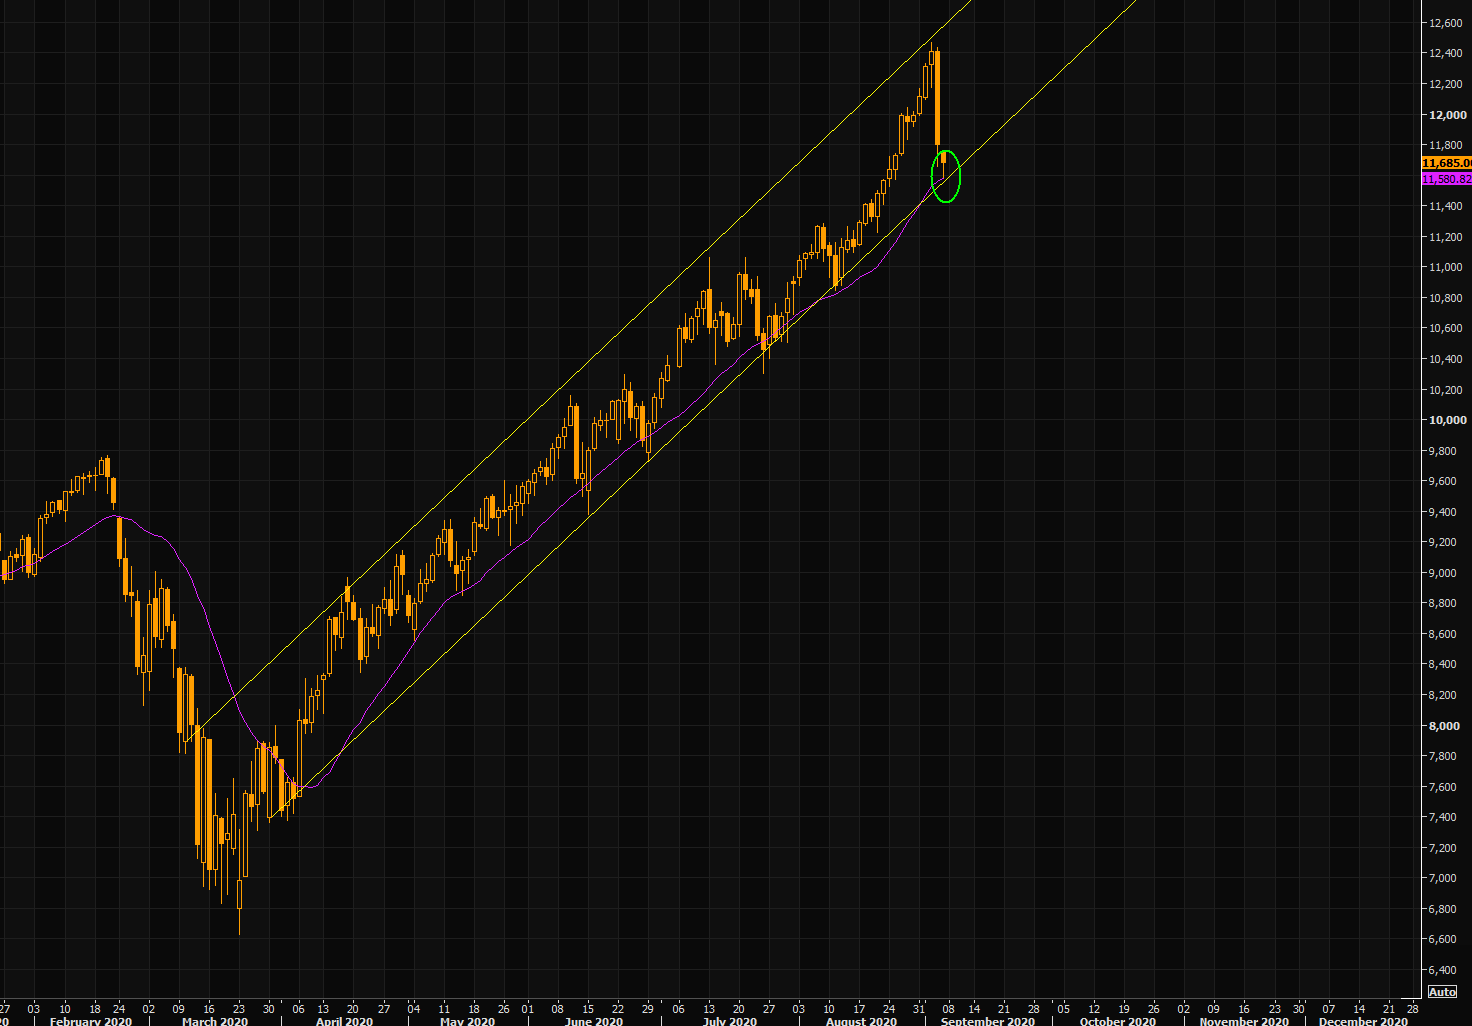 Time to go back to "long work"? - NASDAQ right at the trend channel lows and the 21 day moving